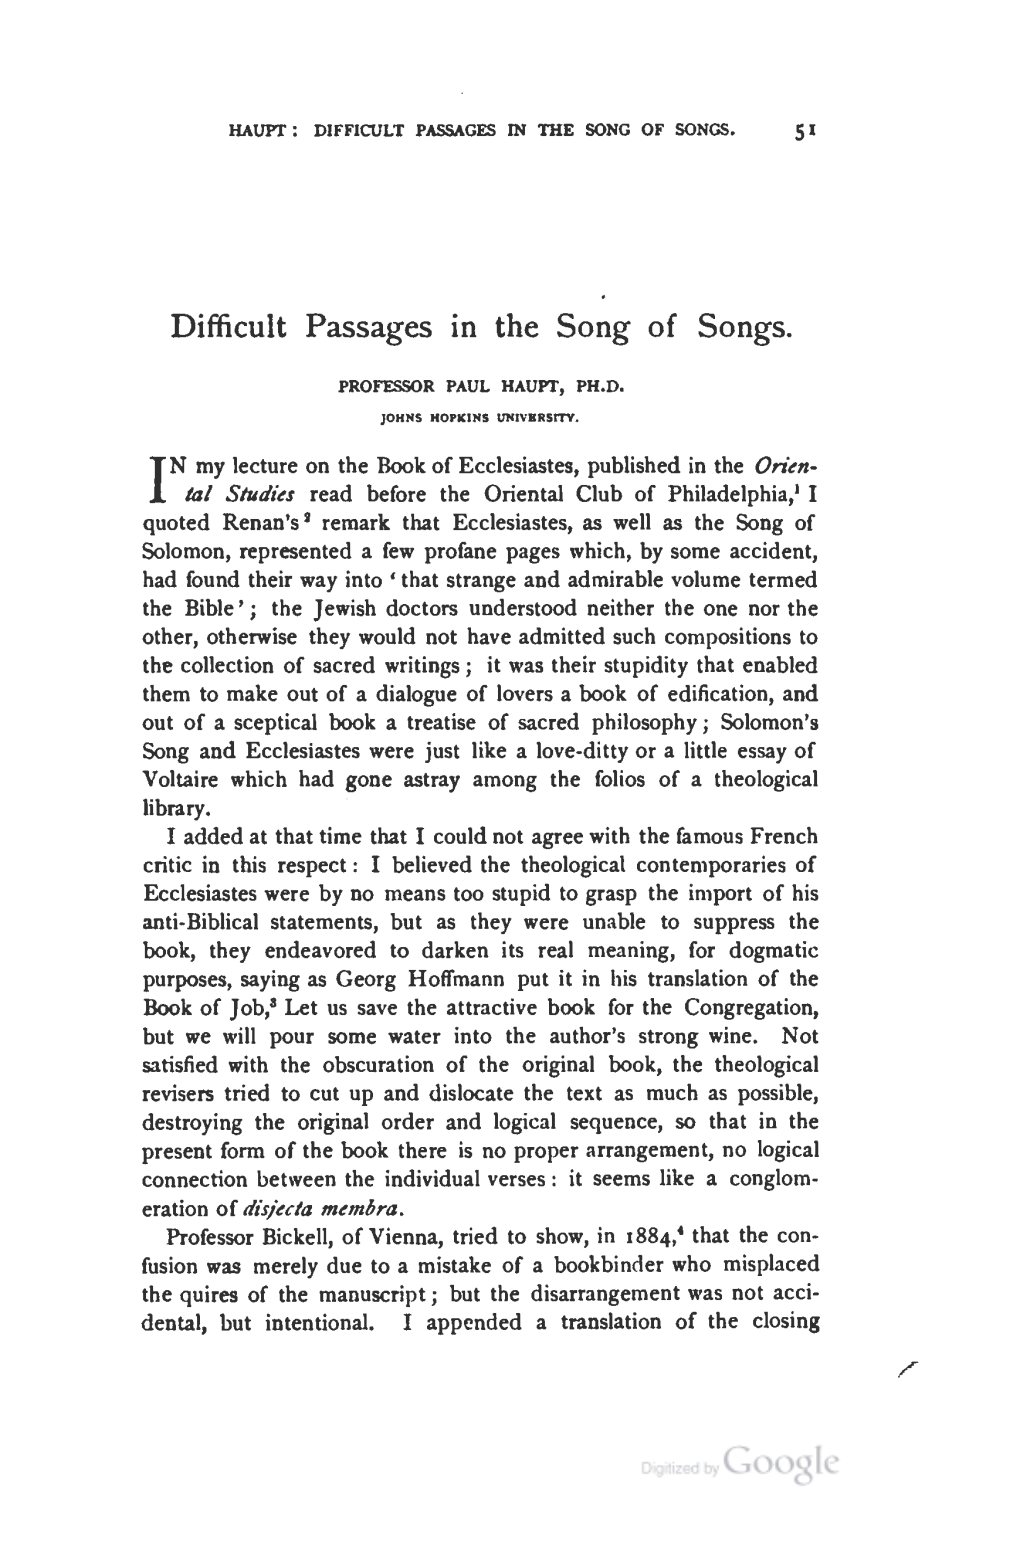 Difficult Passages in the Song of Songs